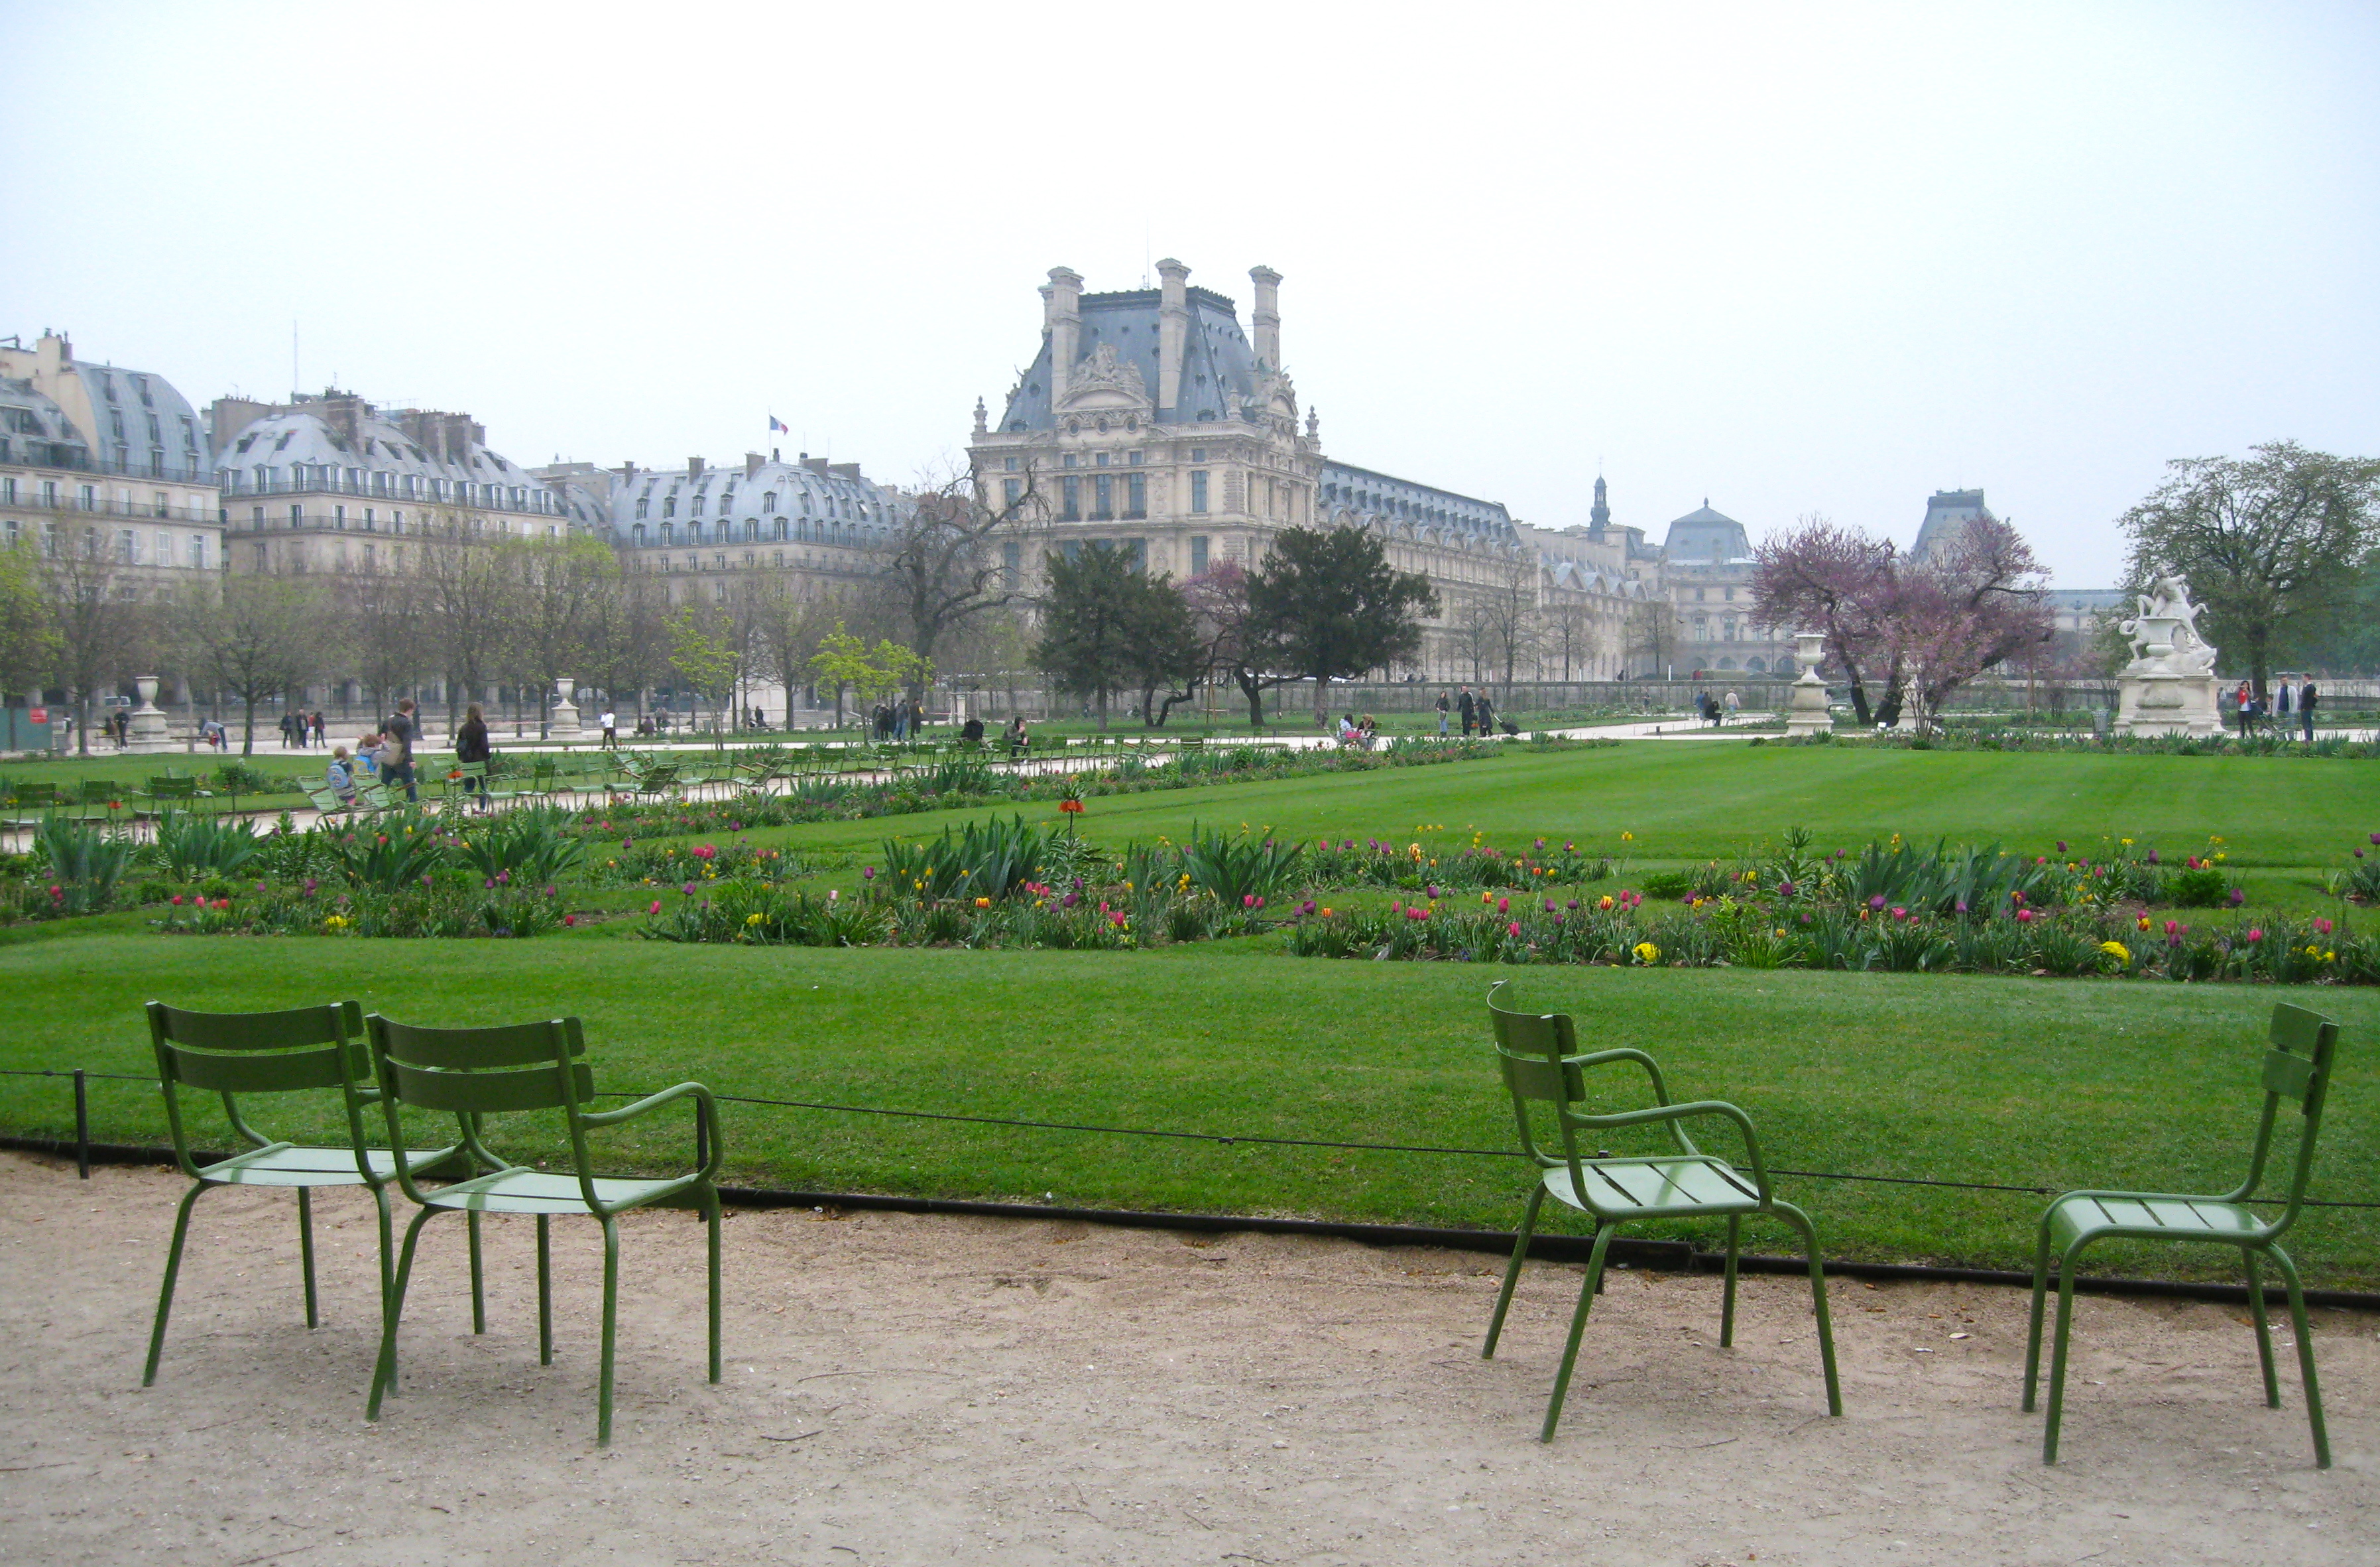 The Tuileries in Paris. Photo by me.